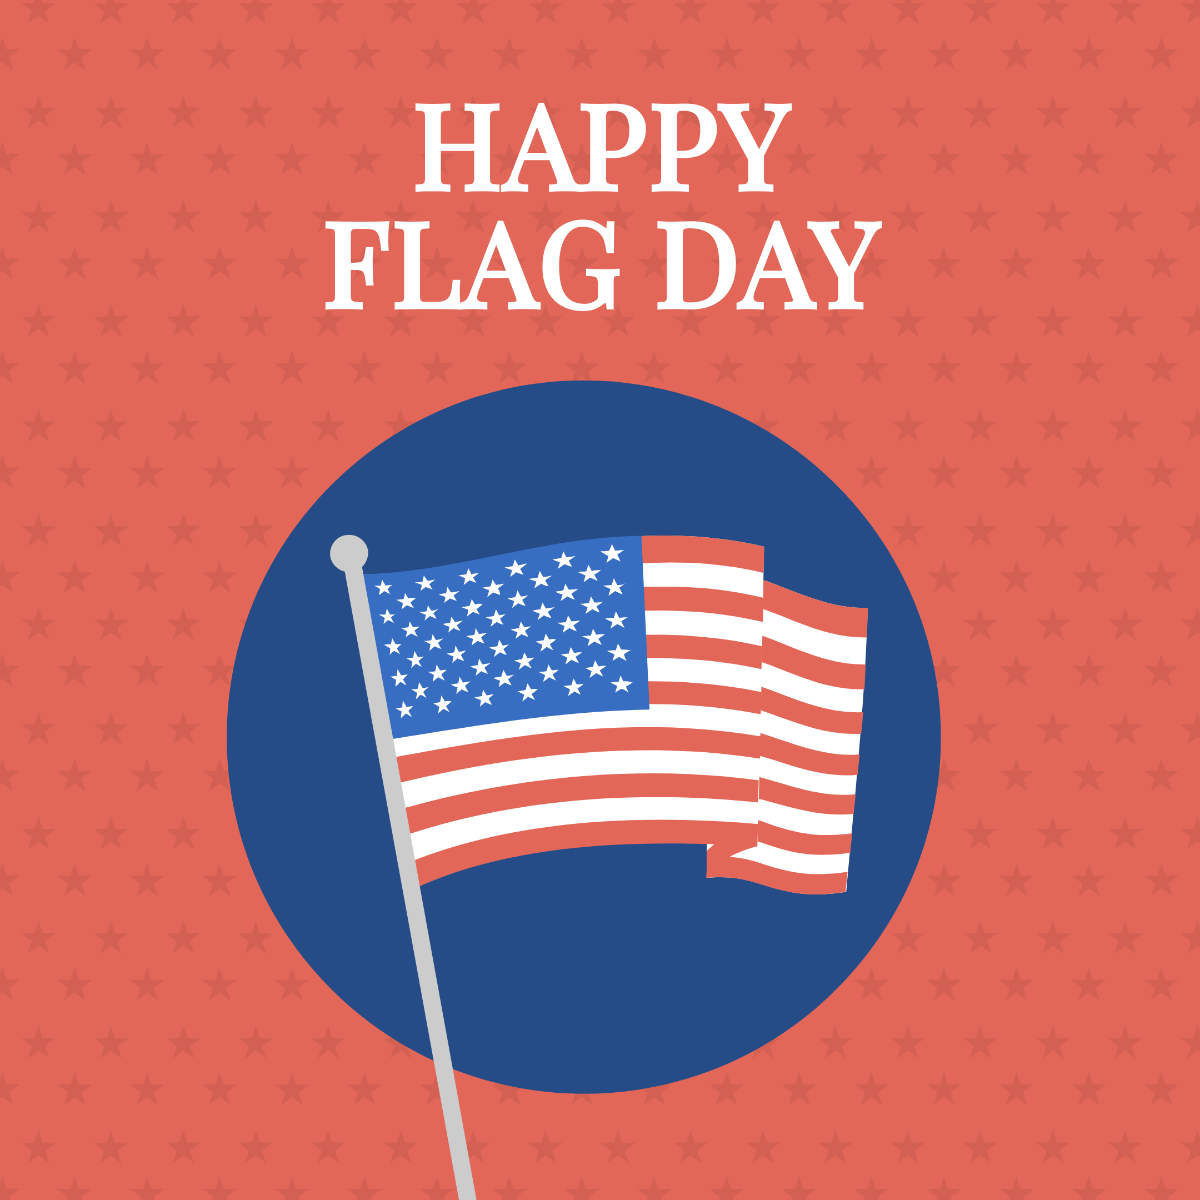 Happy Flag Day Image Template